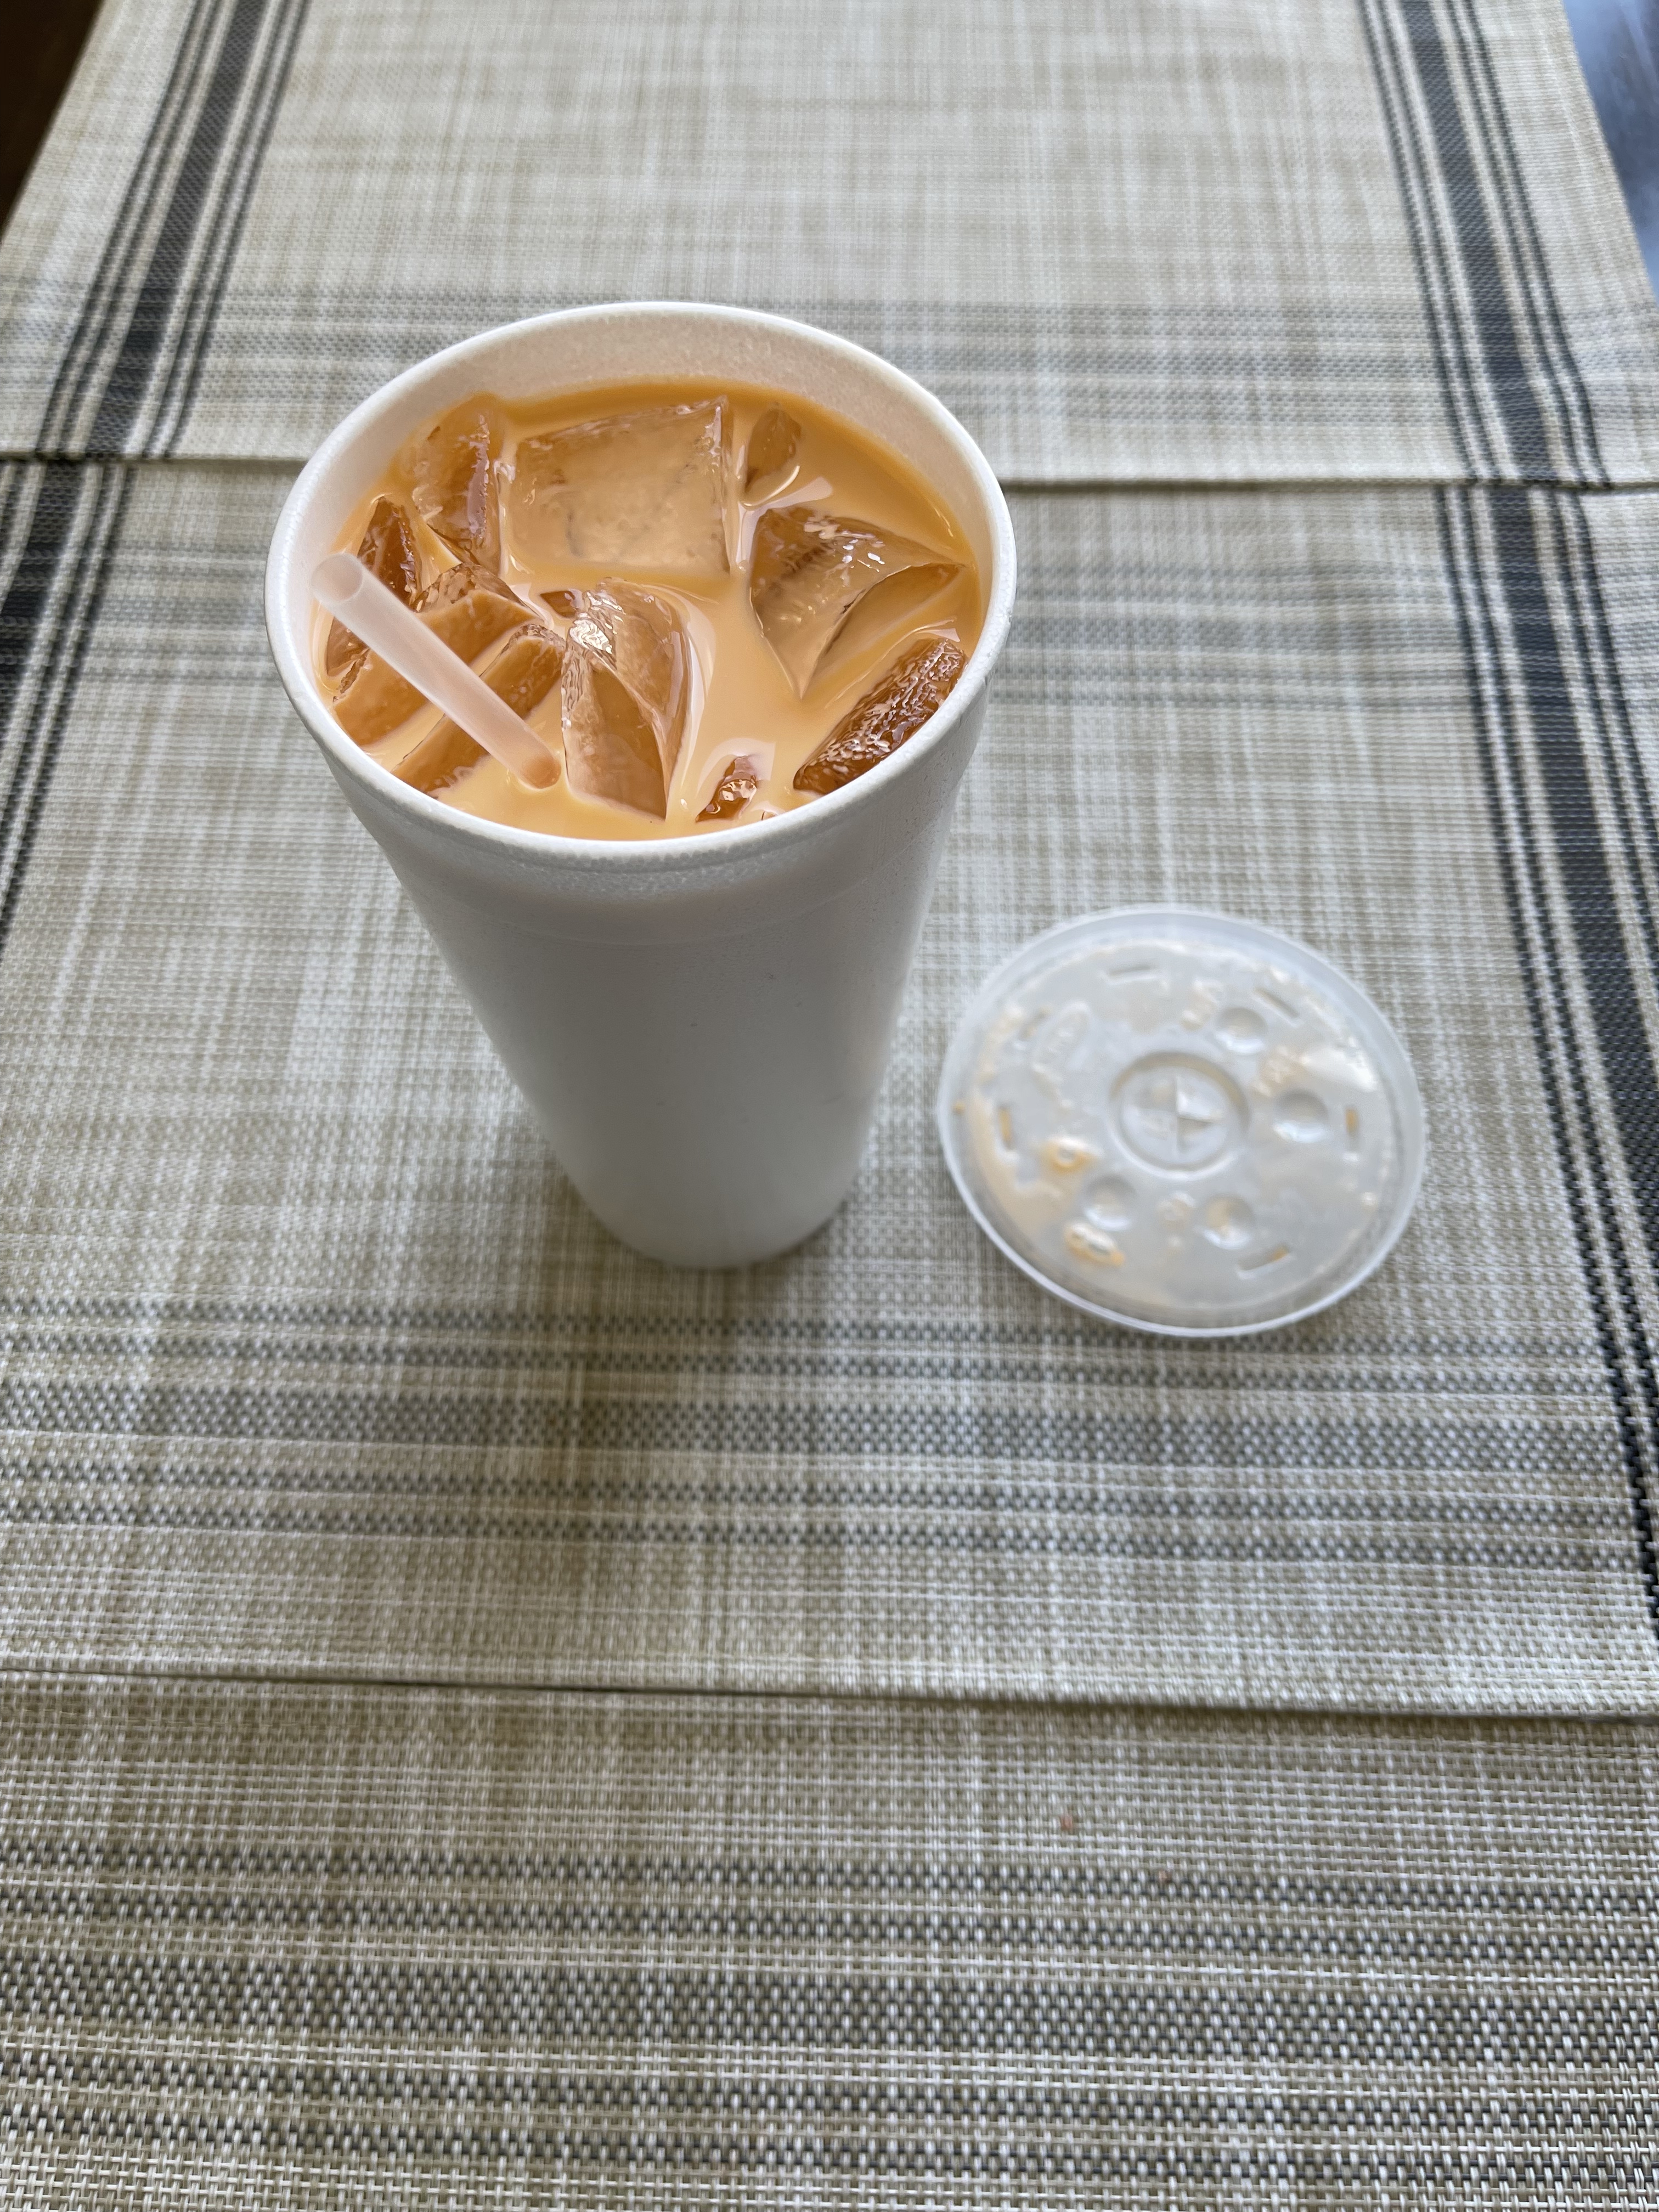 On a brown tablecloth, there is a to go cup with the cover removed. Inside, there is a light brown Thai iced tea with ice. Photo by Shrivatsa Ravikumar.